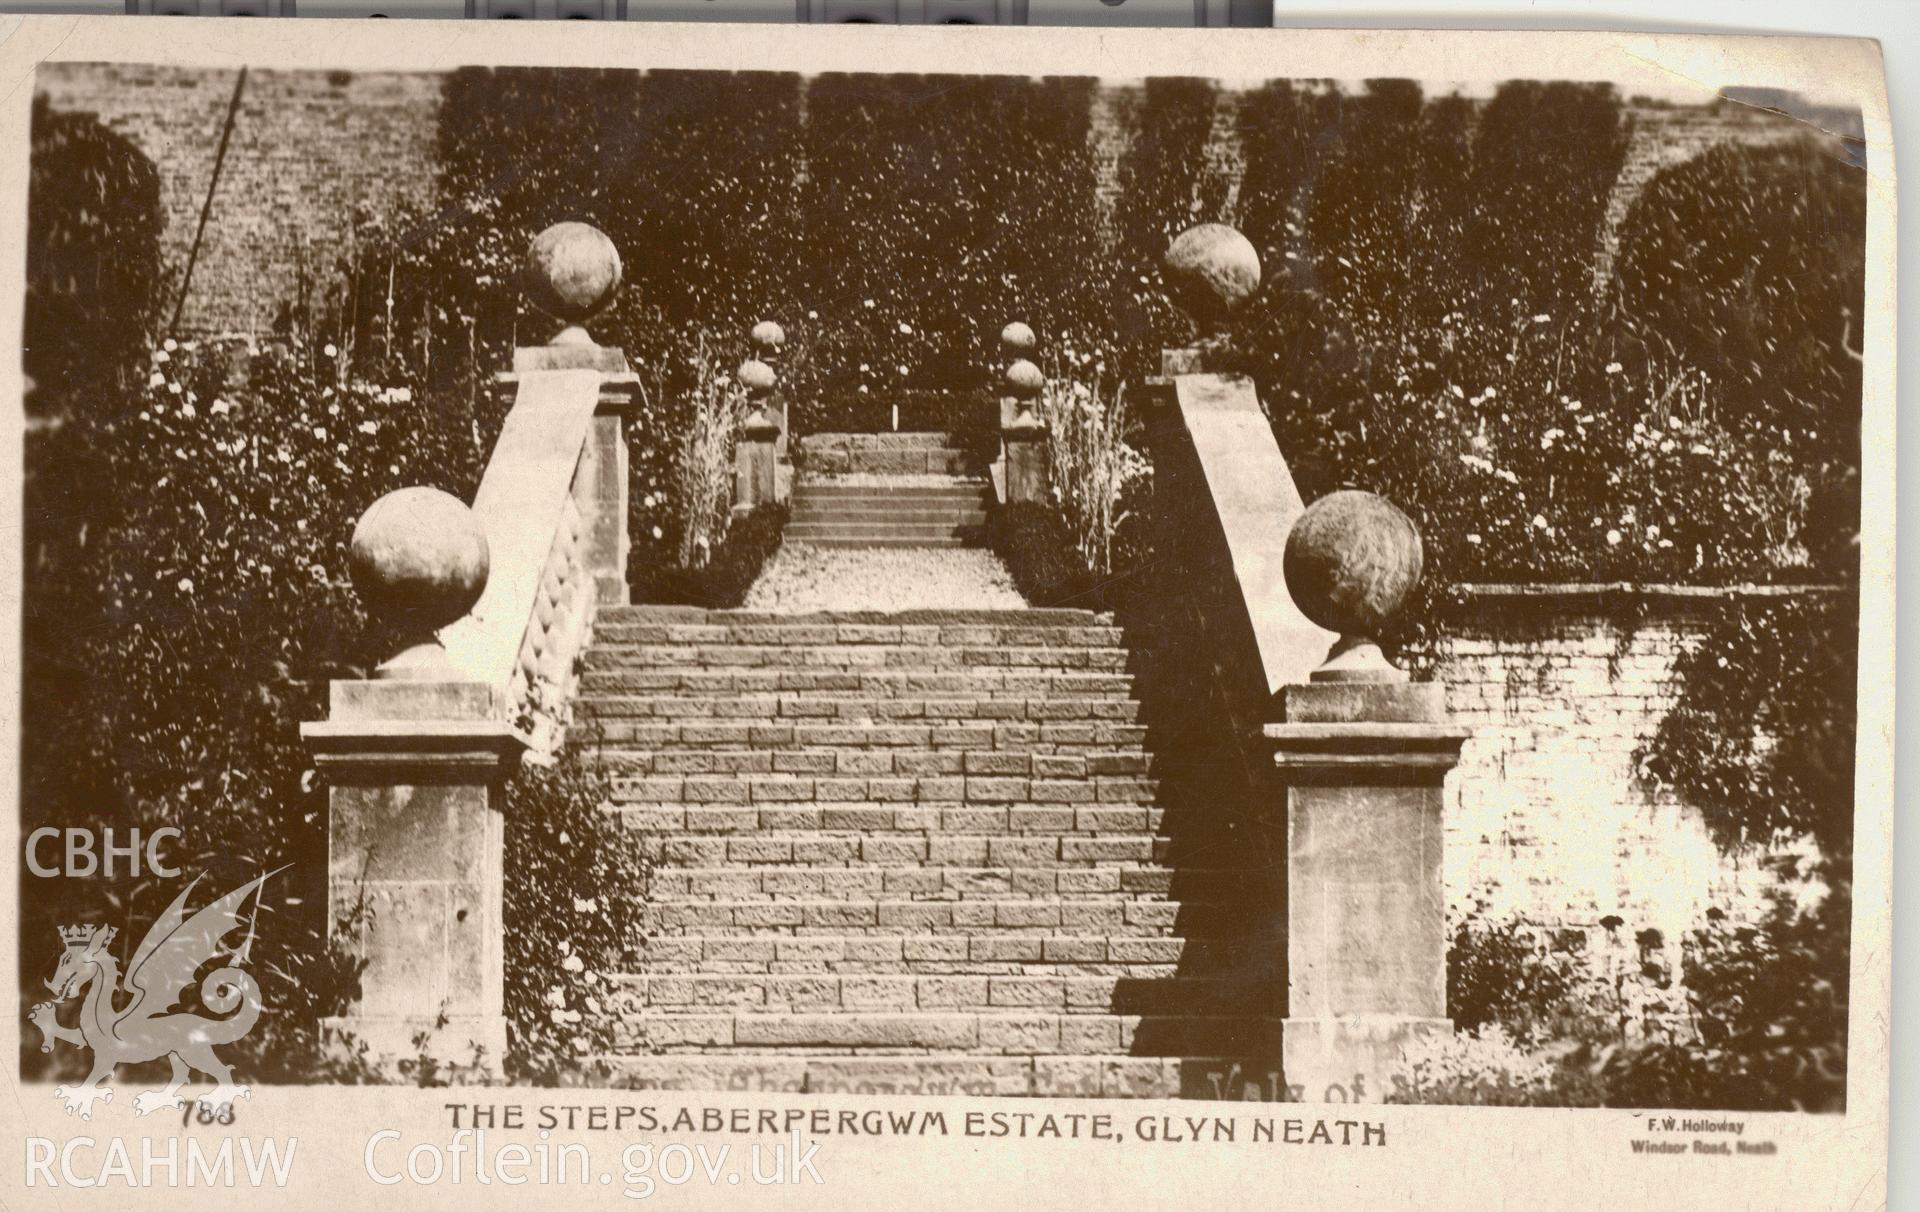 Digitised postcard image of the steps at Aberpergwm House, Neath, F.W. Holloway, Windsor Road, Neath. Produced by Parks and Gardens Data Services, from an original item in the Peter Davis Collection at Parks and Gardens UK. We hold only web-resolution images of this collection, suitable for viewing on screen and for research purposes only. We do not hold the original images, or publication quality scans.